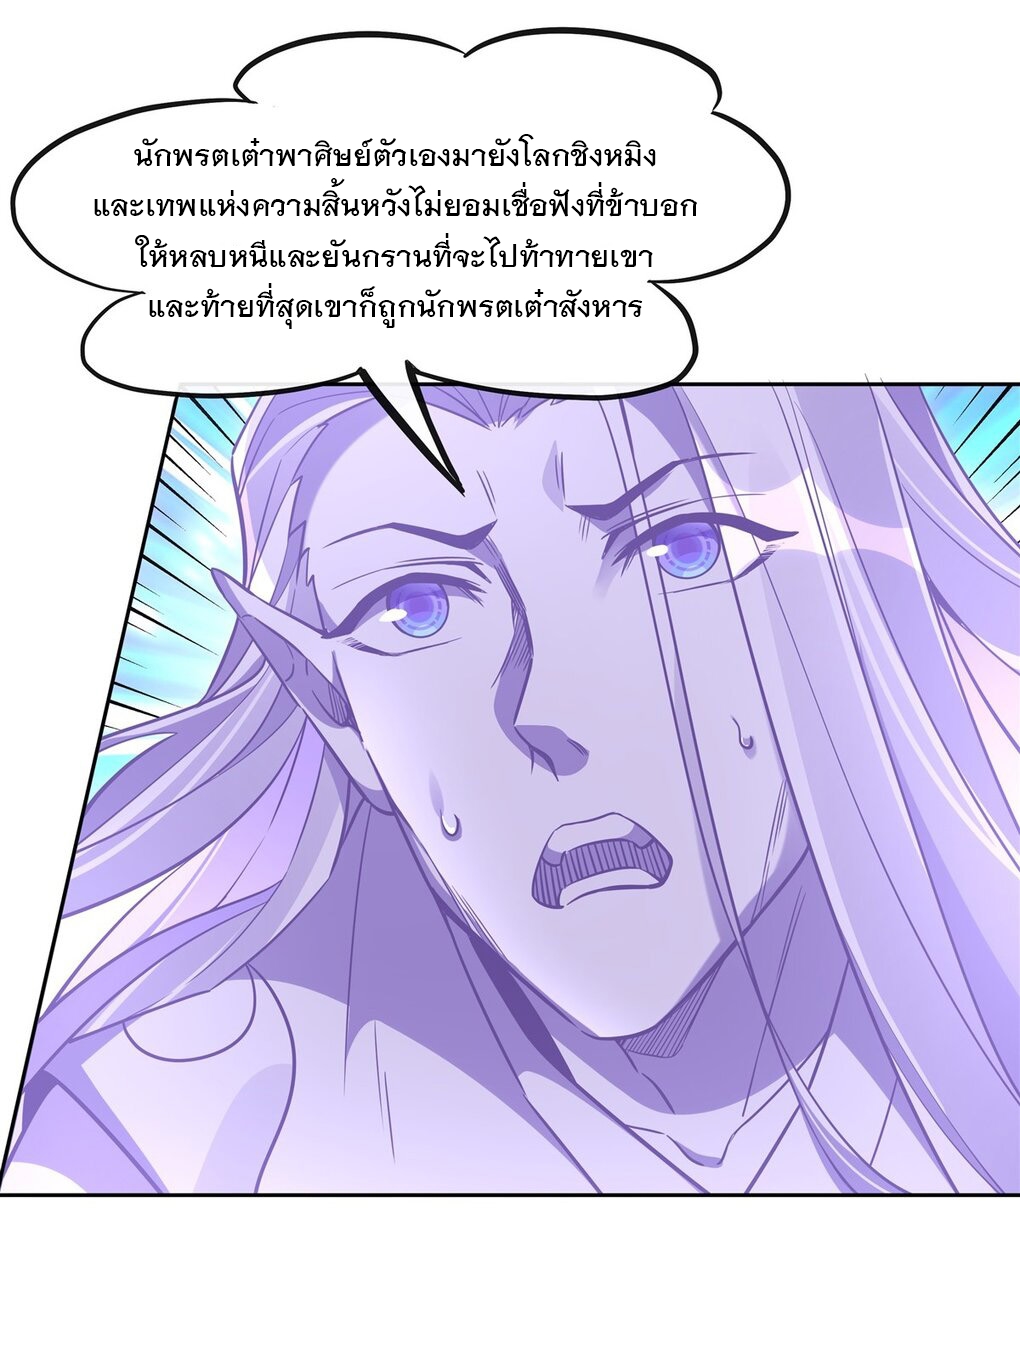 My Female Apprentices Are All Big Shots From the Future Ã Â¸â€¢Ã Â¸Â­Ã Â¸â„¢Ã Â¸â€”Ã Â¸ÂµÃ Â¹Ë† 100 (40)